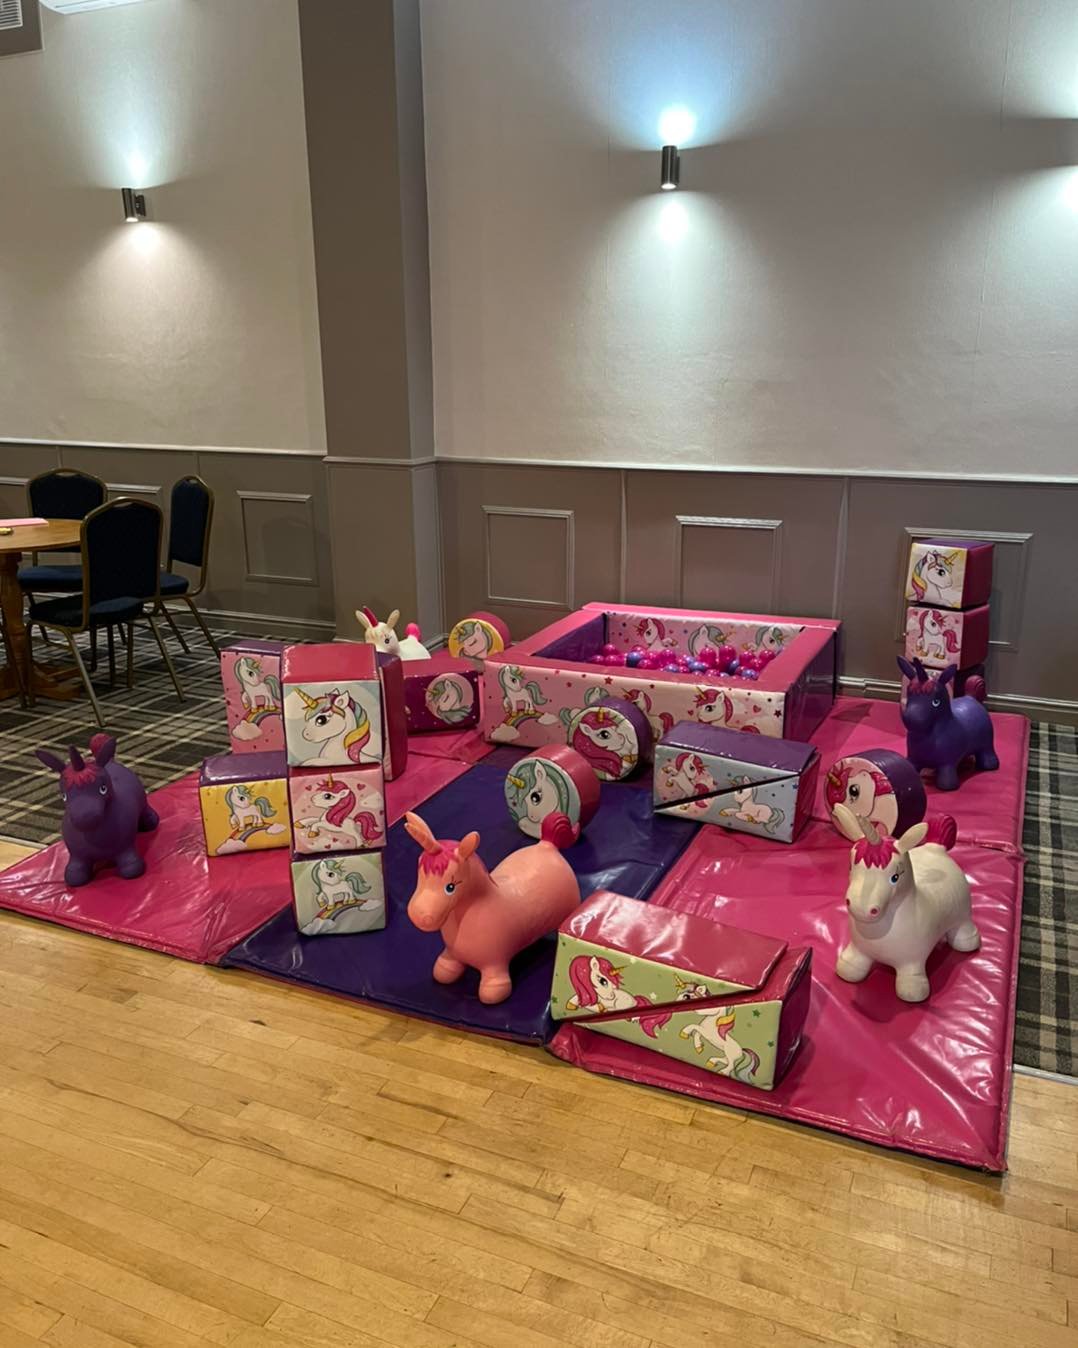 This image shows a unicorn soft play set up supplied by SJ's Leisure in St Helens